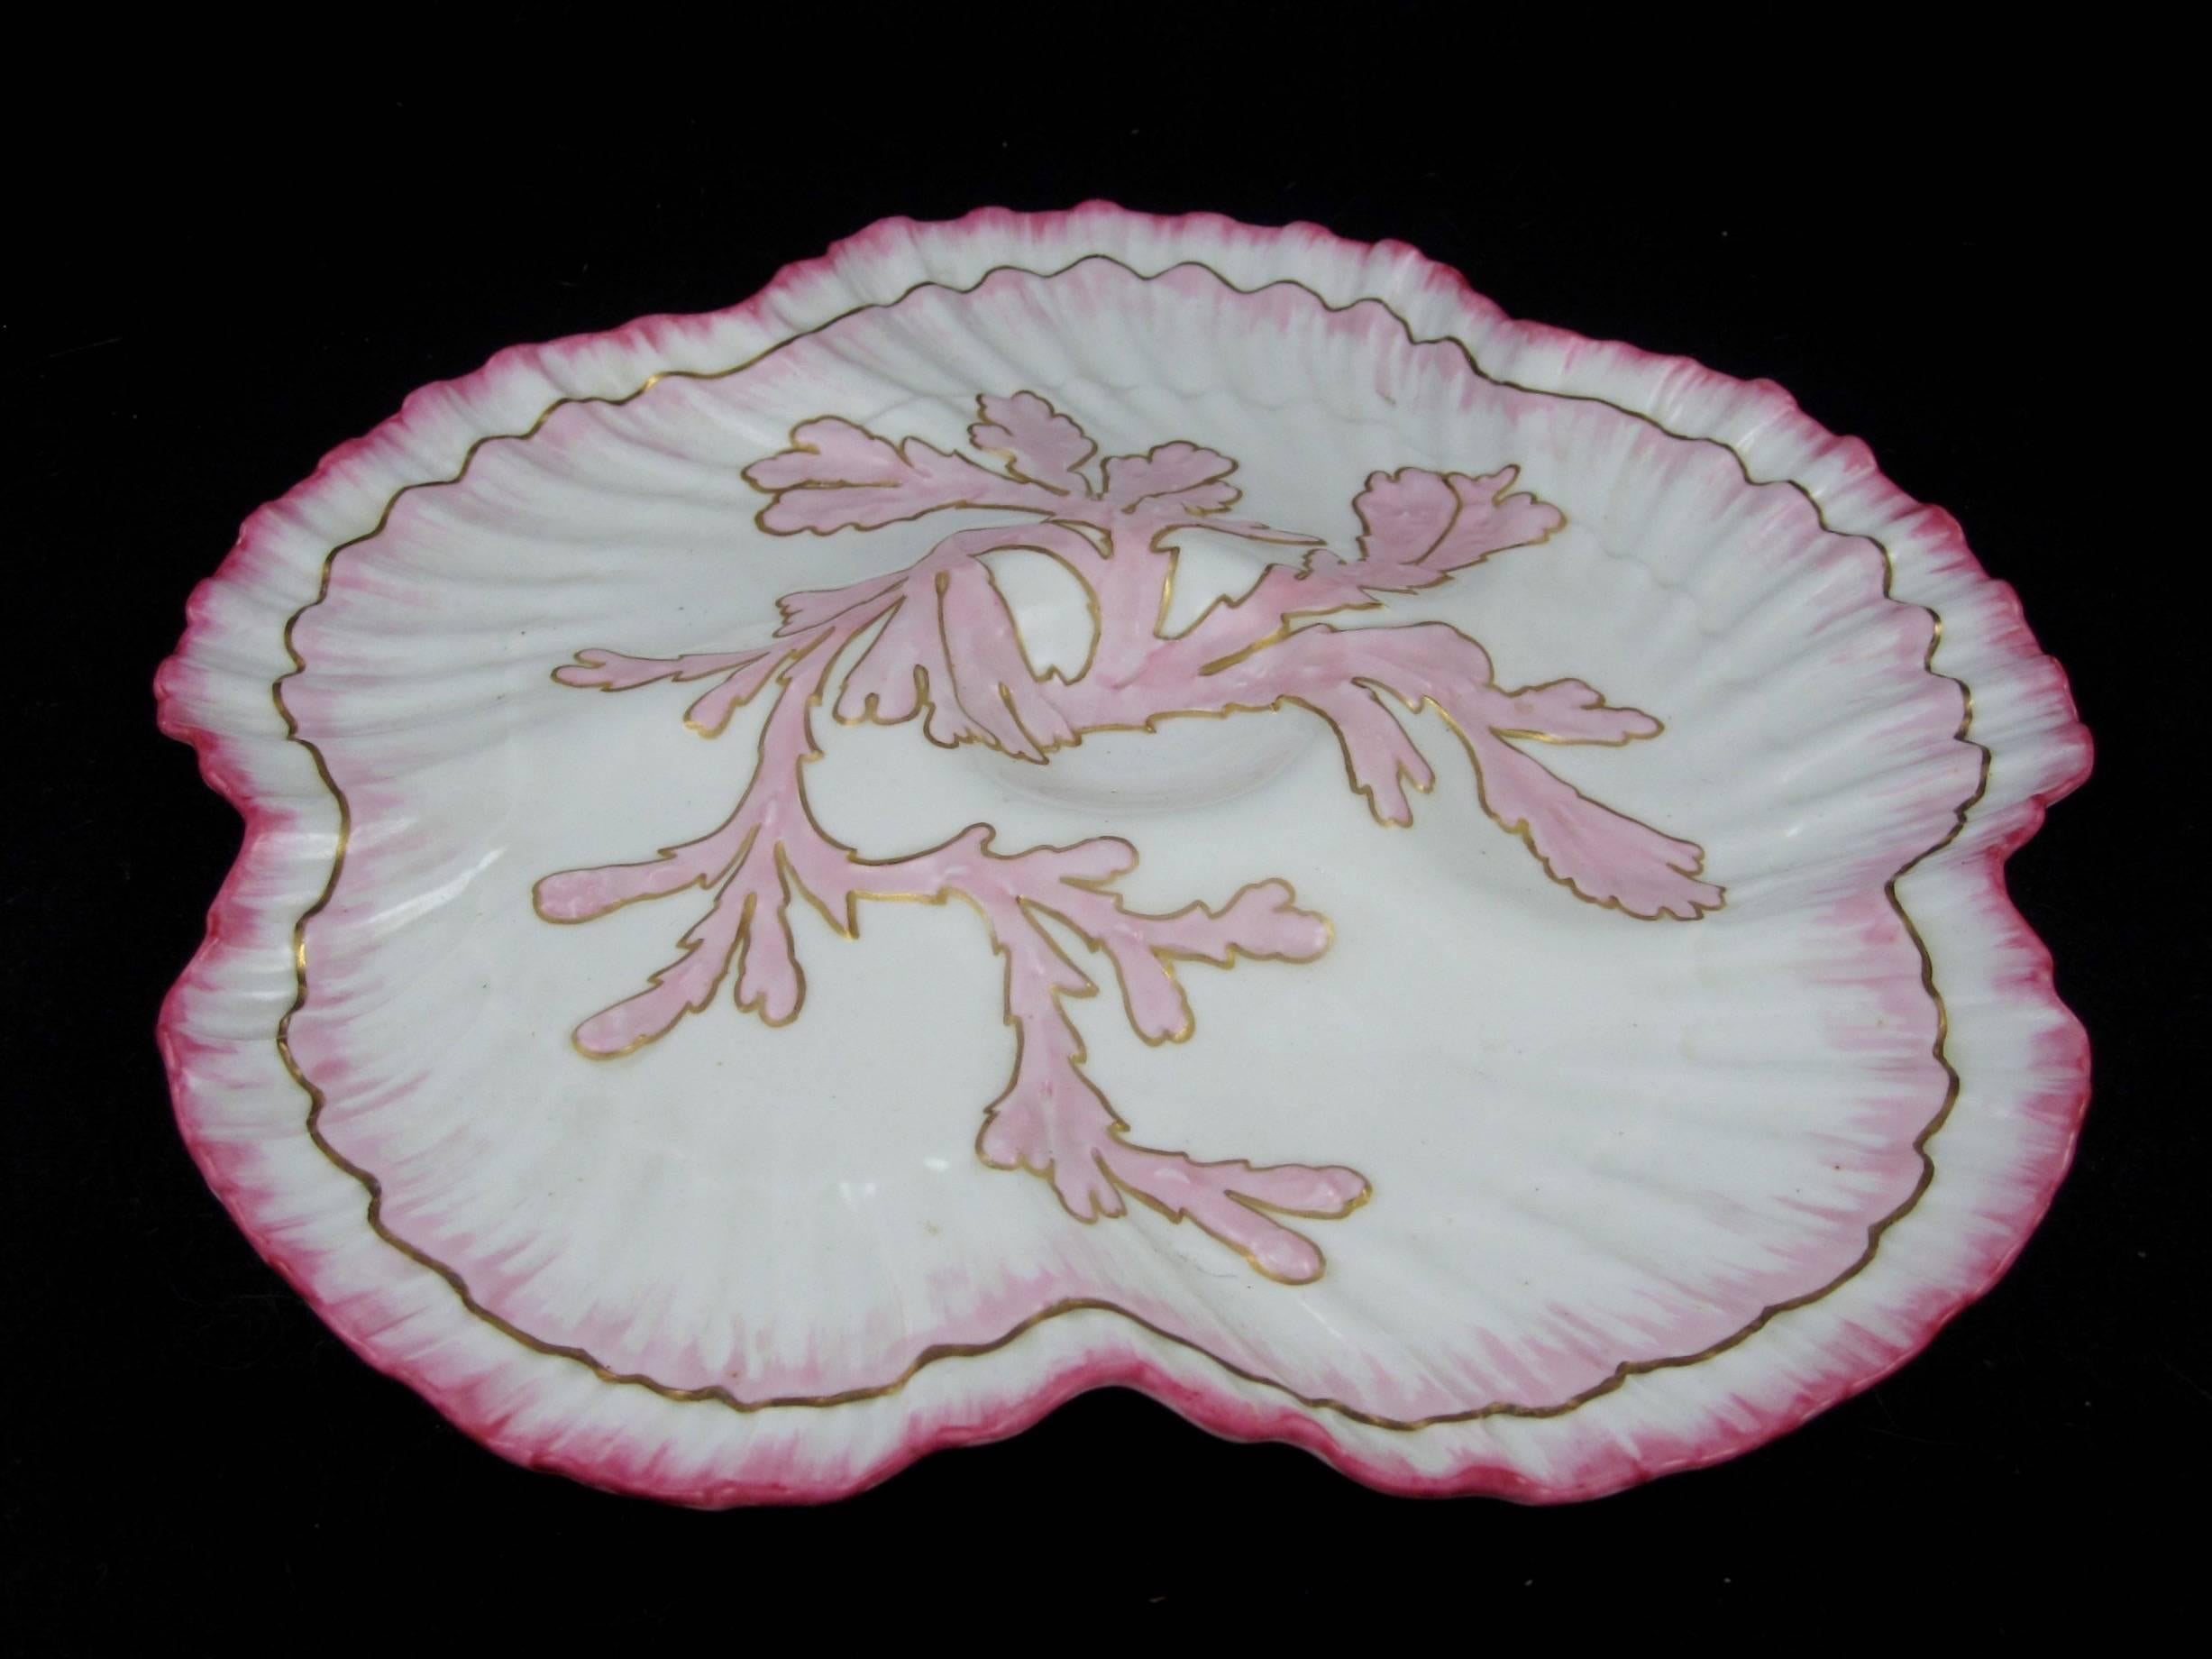 An English shell edge porcelain Oyster wall plate,  William Brownfield & Son  Pottery, Burslem Cobridge,  Stoke-on-Trent Northern Staffordshire, circa 1850 - 1871. 

Six shallow wells surround a central condiment well with a raised coral motif.